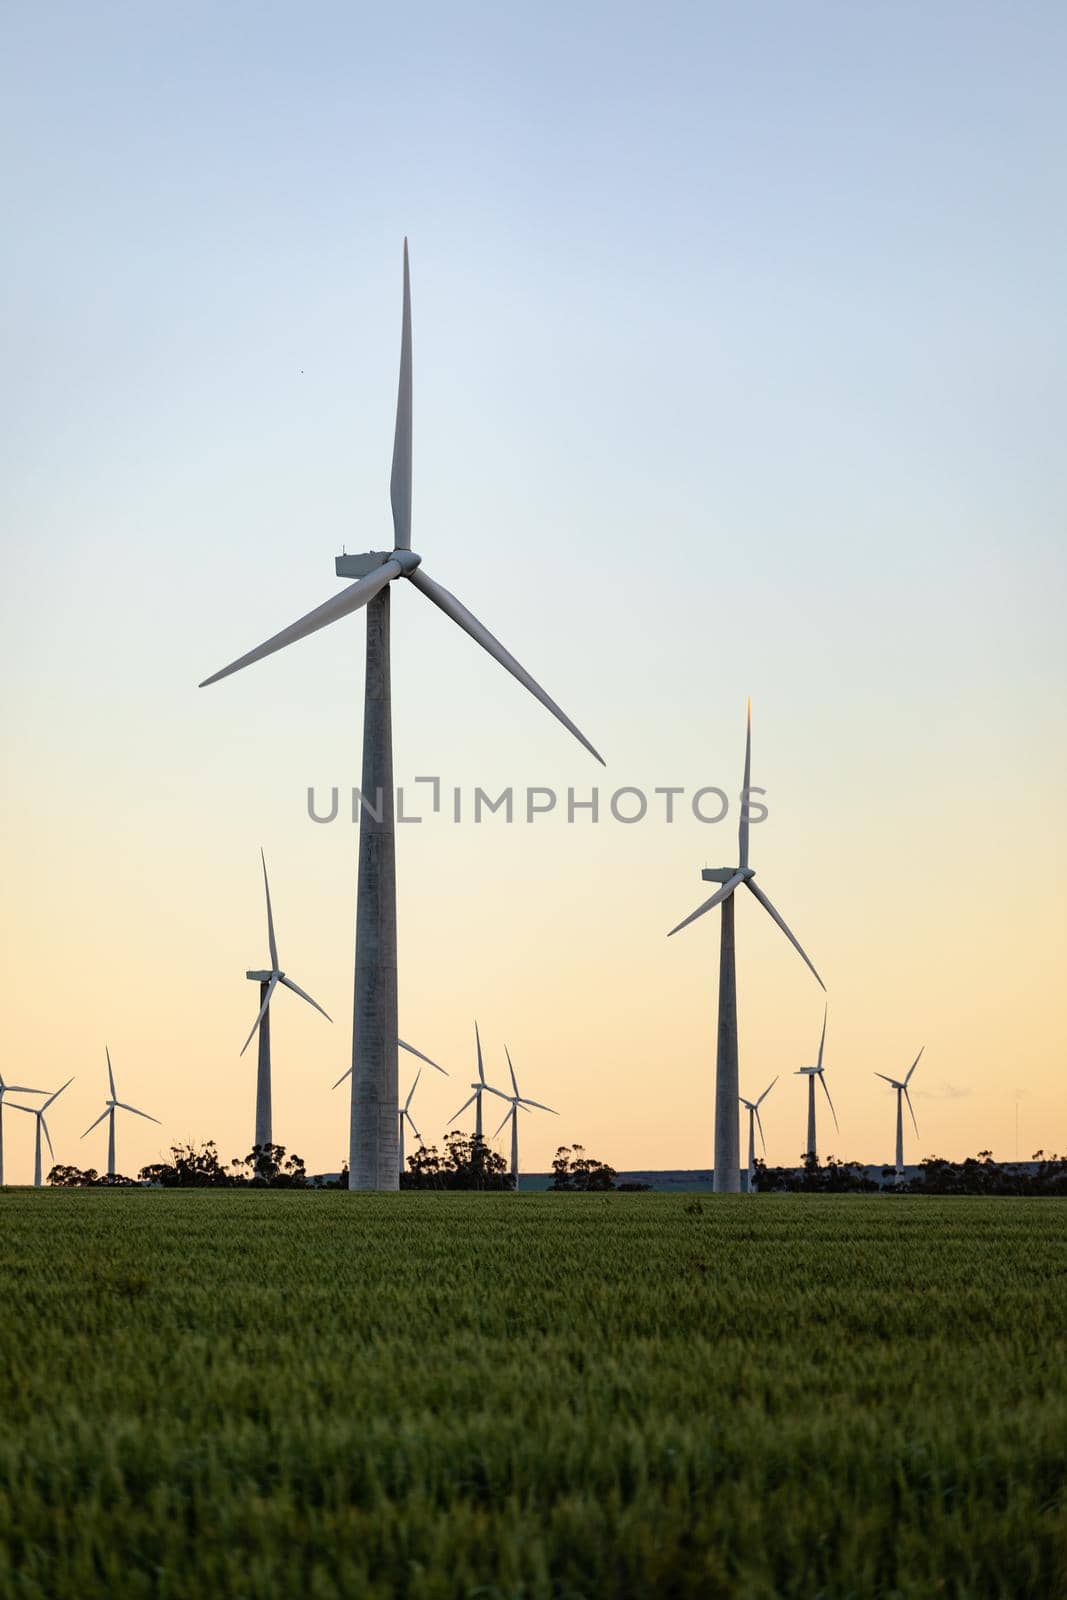 General view of wind turbines in countryside landscape with cloudless sky. environment, sustainability, ecology, renewable energy, global warming and climate change awareness.